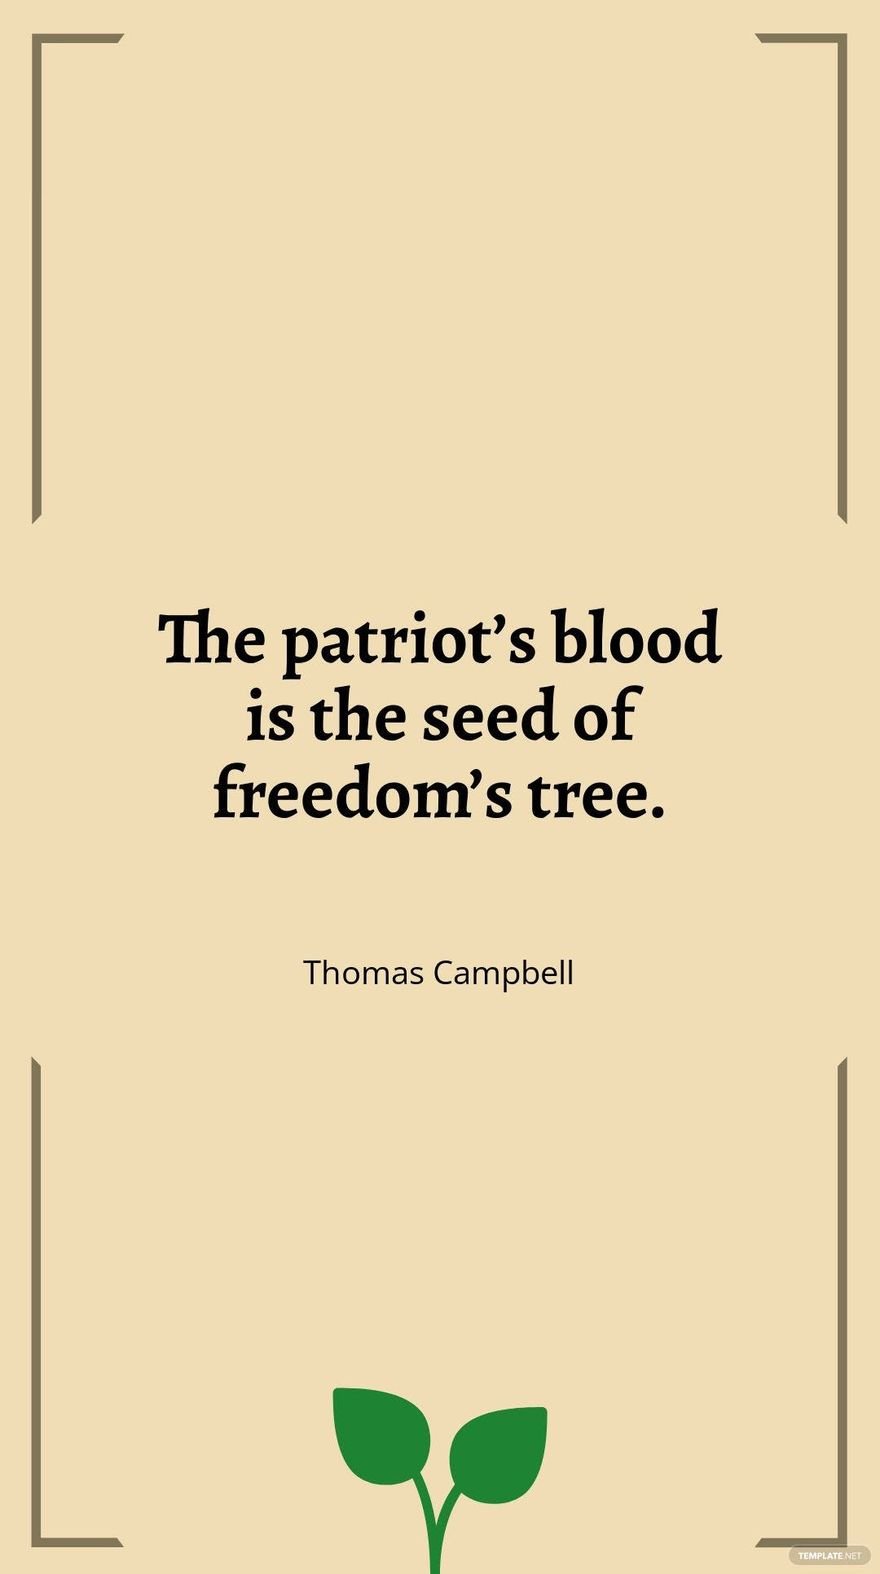 Thomas Campbell - “The patriot’s blood is the seed of freedom’s tree.”